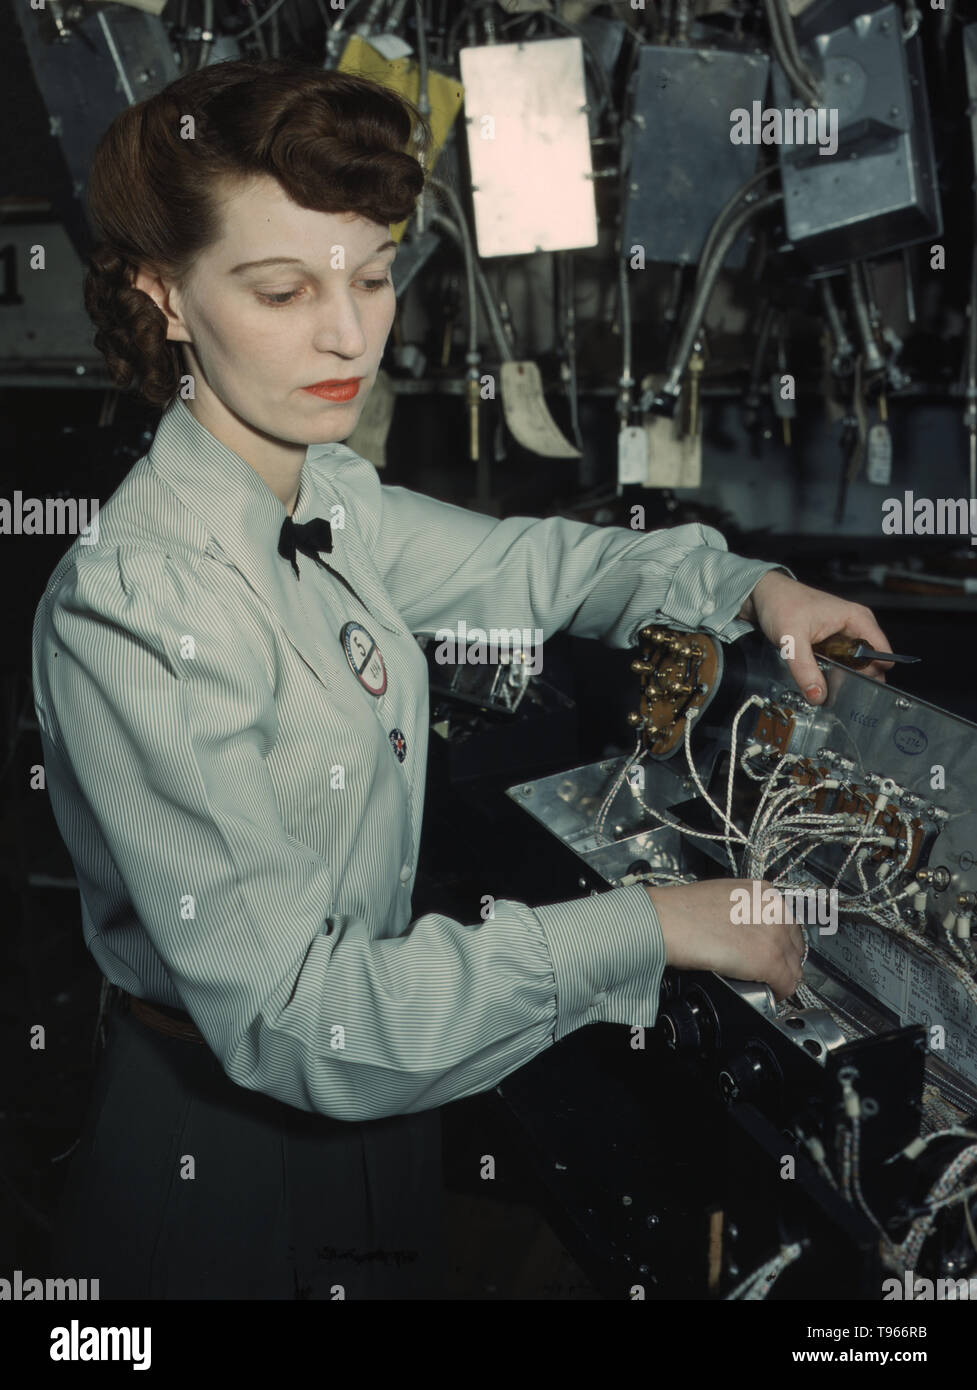 Electronics technician, Goodyear Aircraft Corp., Akron, Ohio. Although the image of 'Rosie the Riveter' reflected the industrial work of welders and riveters, the majority of working women filled non-factory positions in every sector of the economy. What unified the experiences of these women was that they proved to themselves, and the country, that they could do a man's job and could do it well. Photographed by Alfred T. Palmer, 1941. Stock Photo